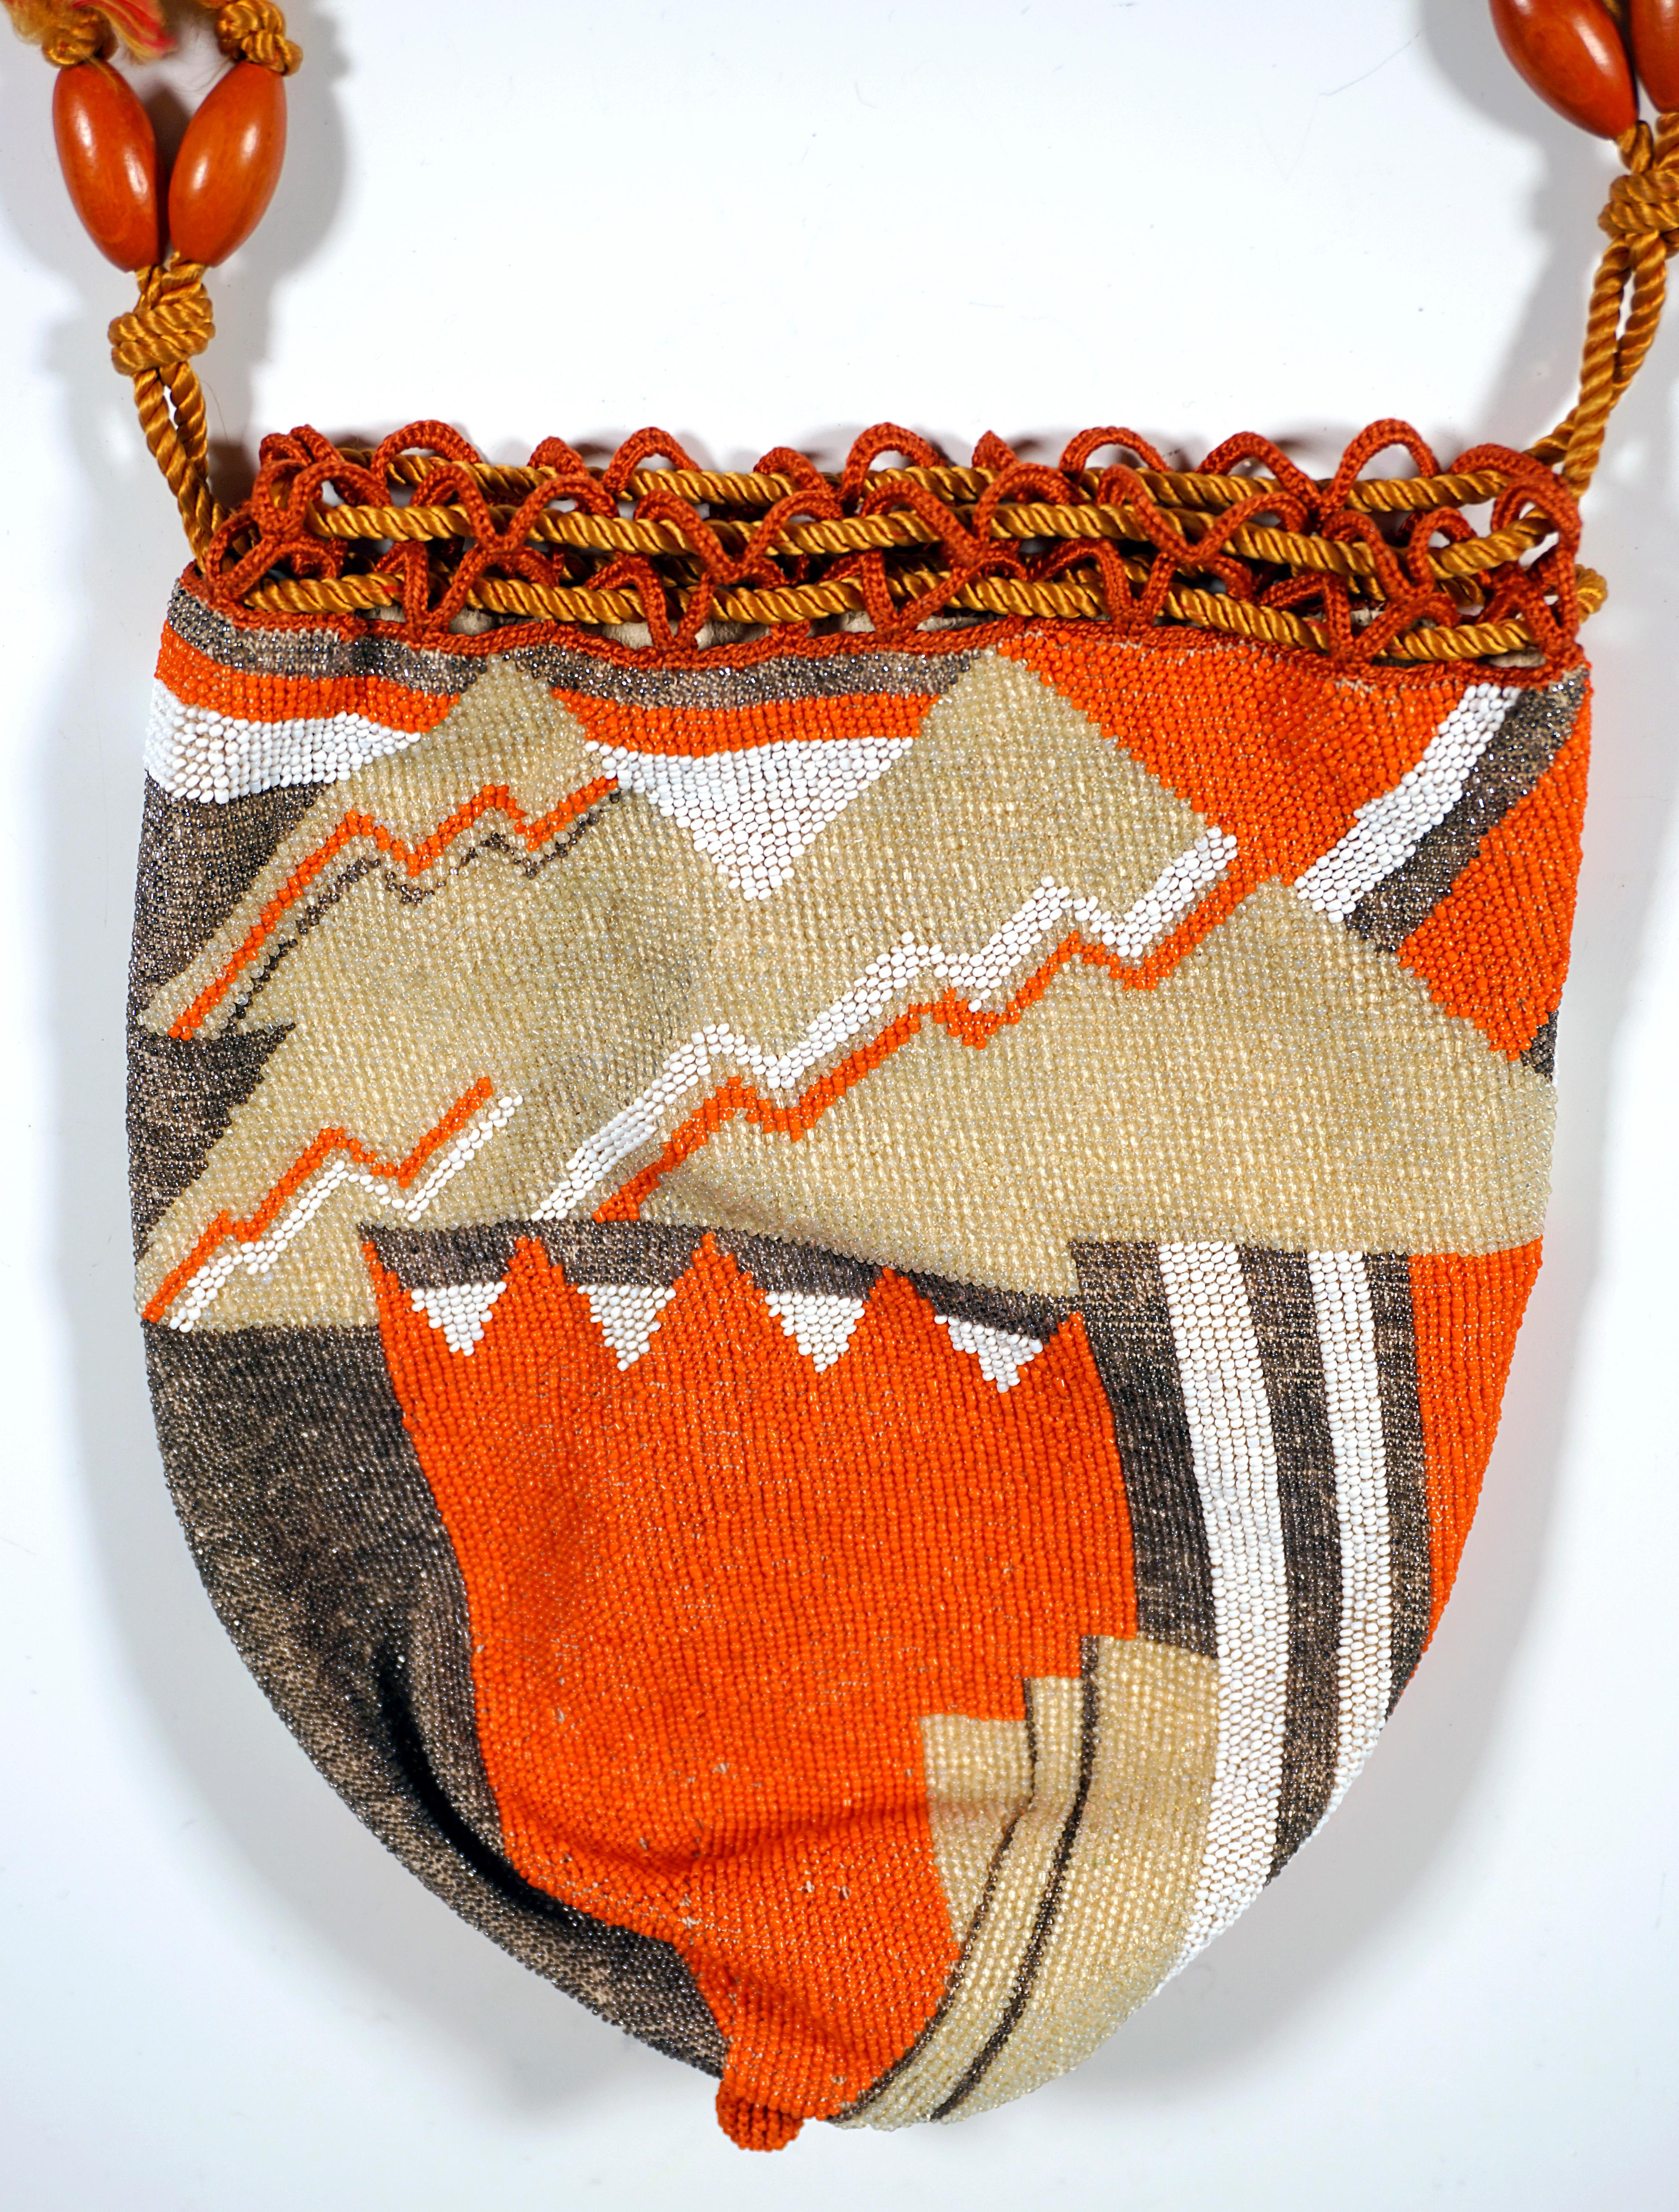 Hand-Crafted Wiener Werkstaette Arts And Crafts, Beaded Bag, by Maria Likarz-Strauss, c 1919 For Sale